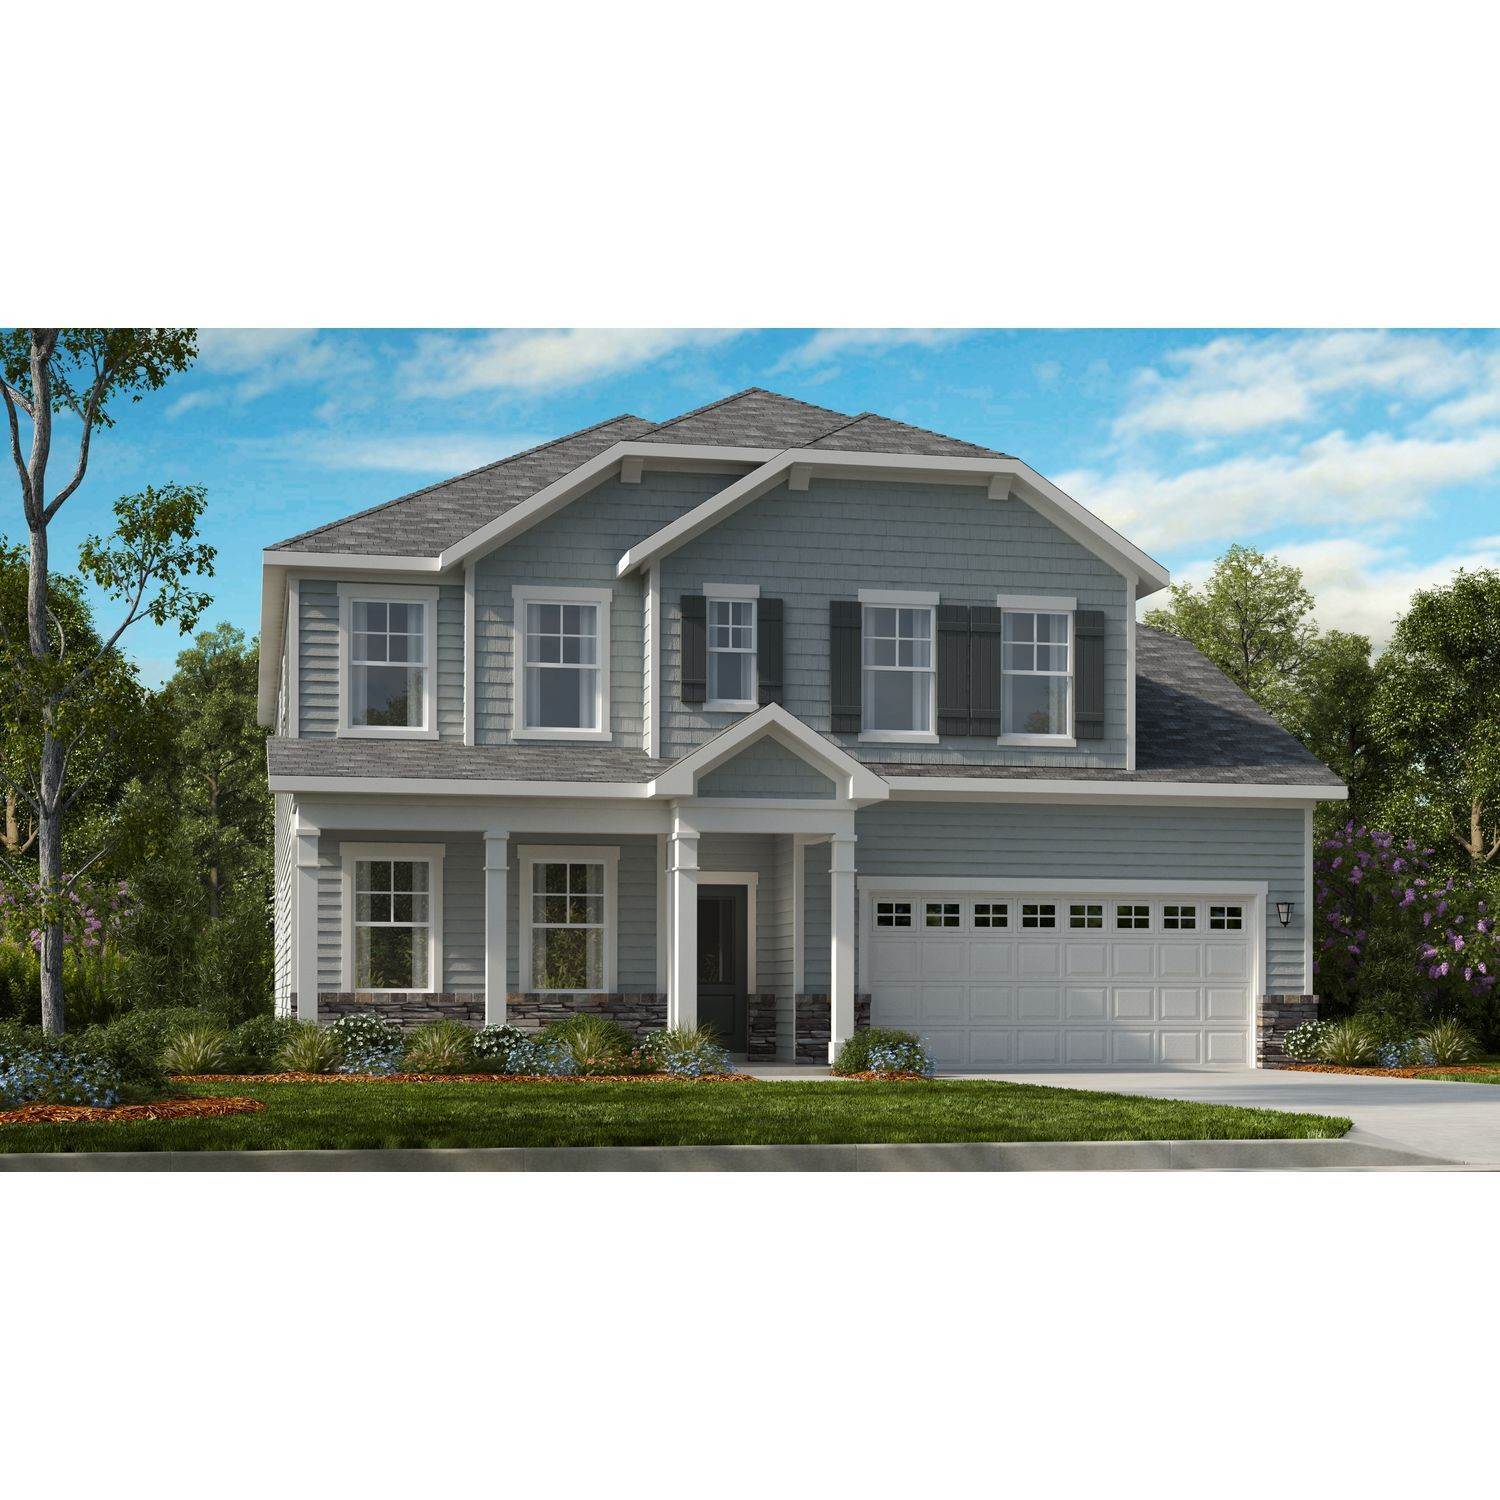 Single Family for Sale at Apex, NC 27523